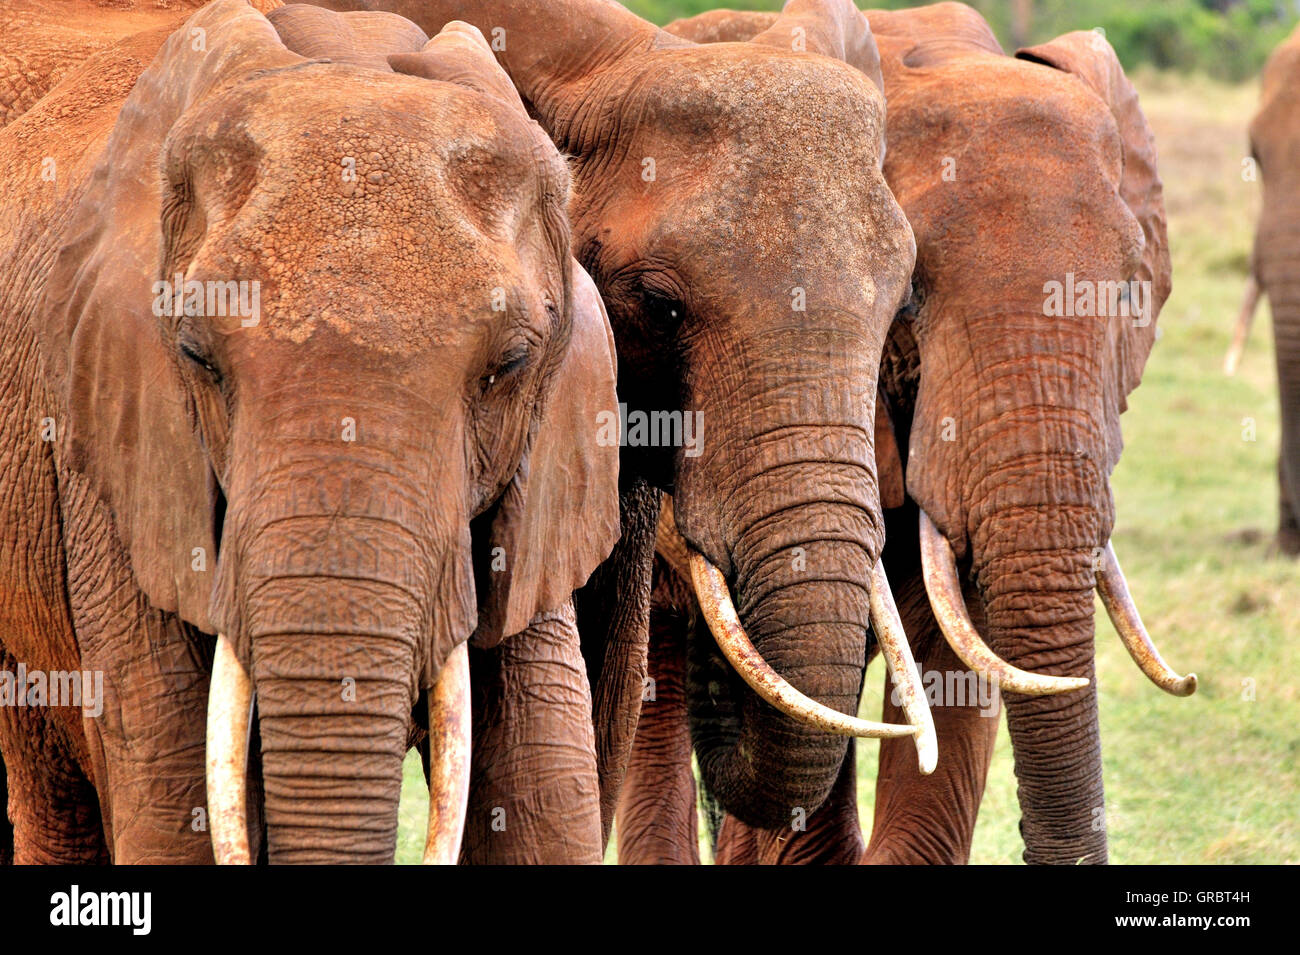 Three Elephants Walking Side By Side, Tusks And Heads Stock Photo